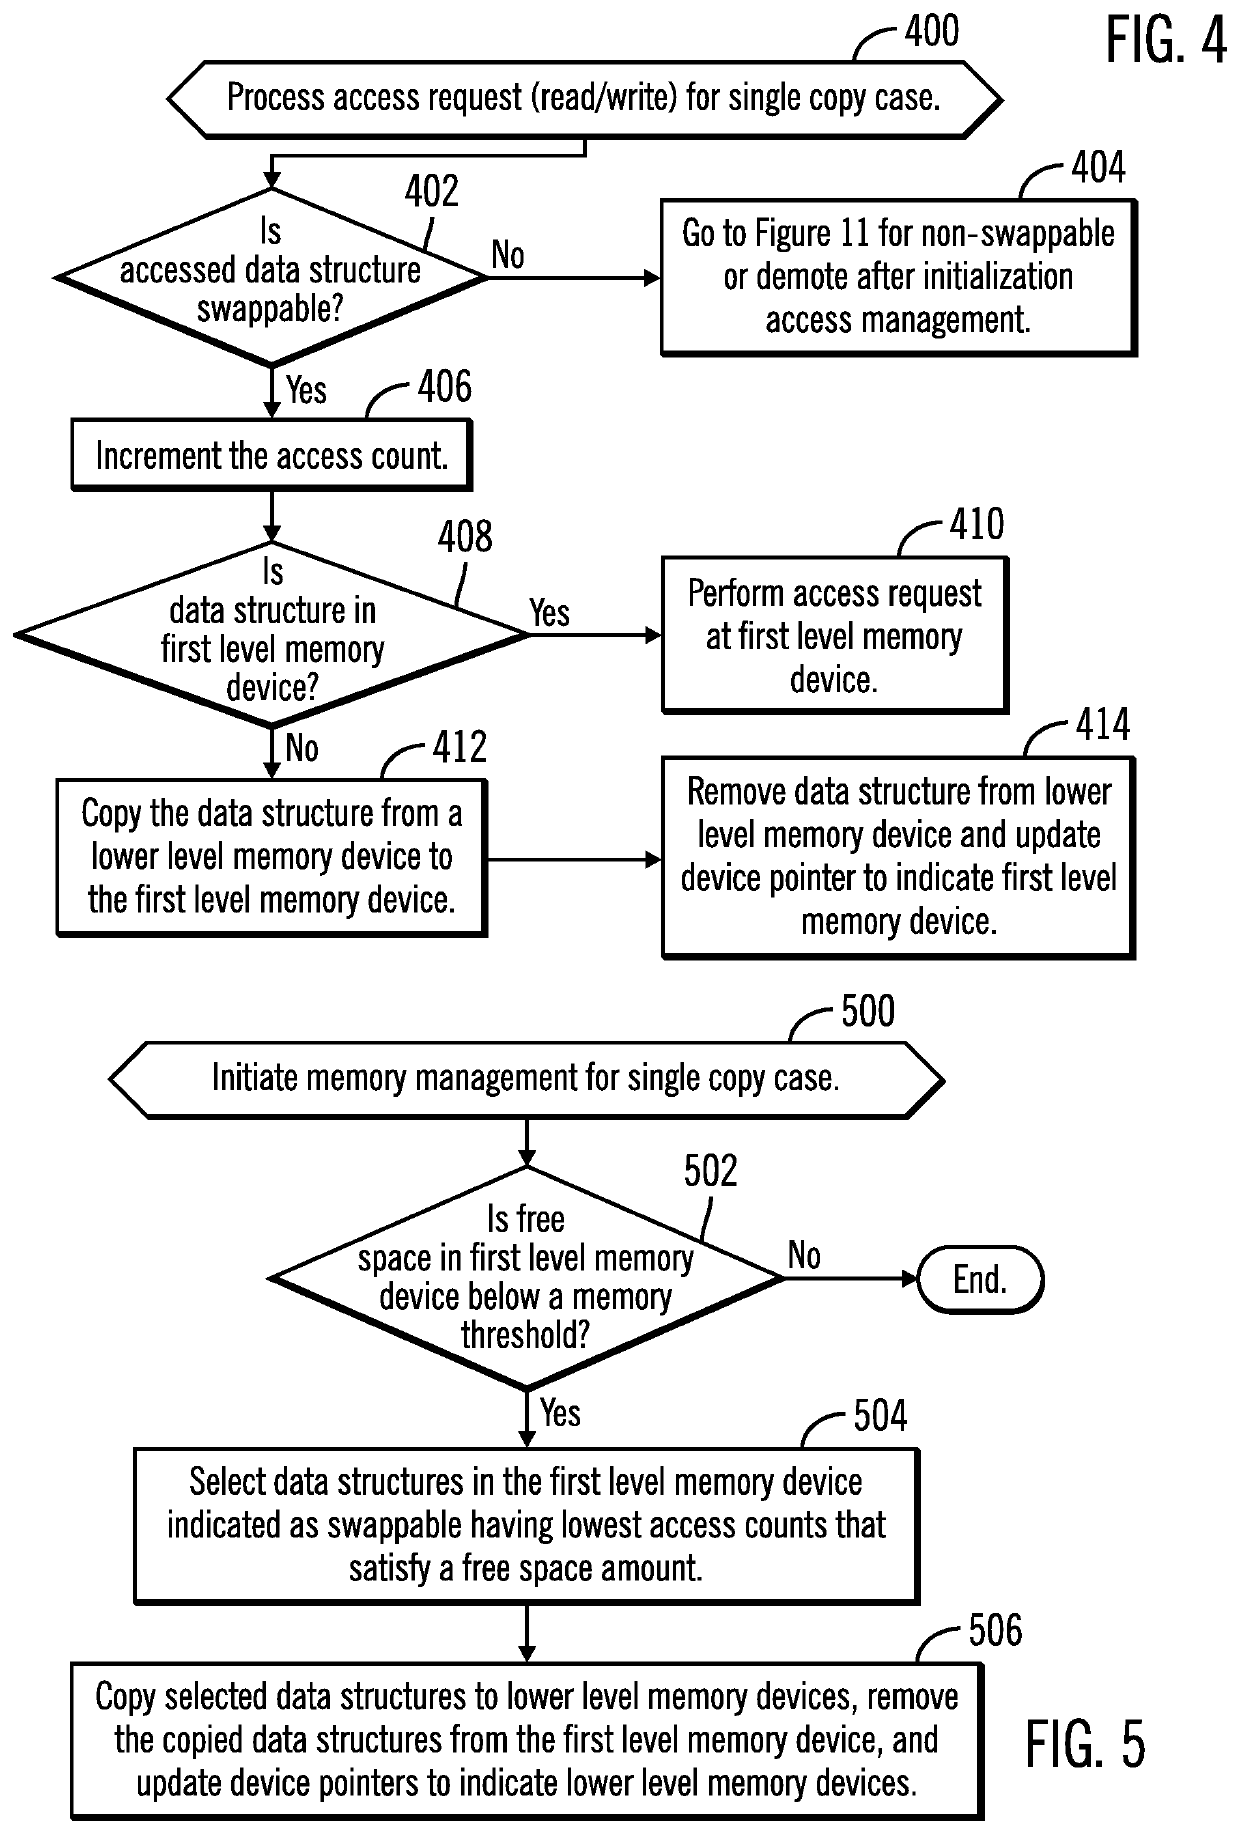 Managing swappable data structures in a plurality of memory devices based on access counts of the data structures